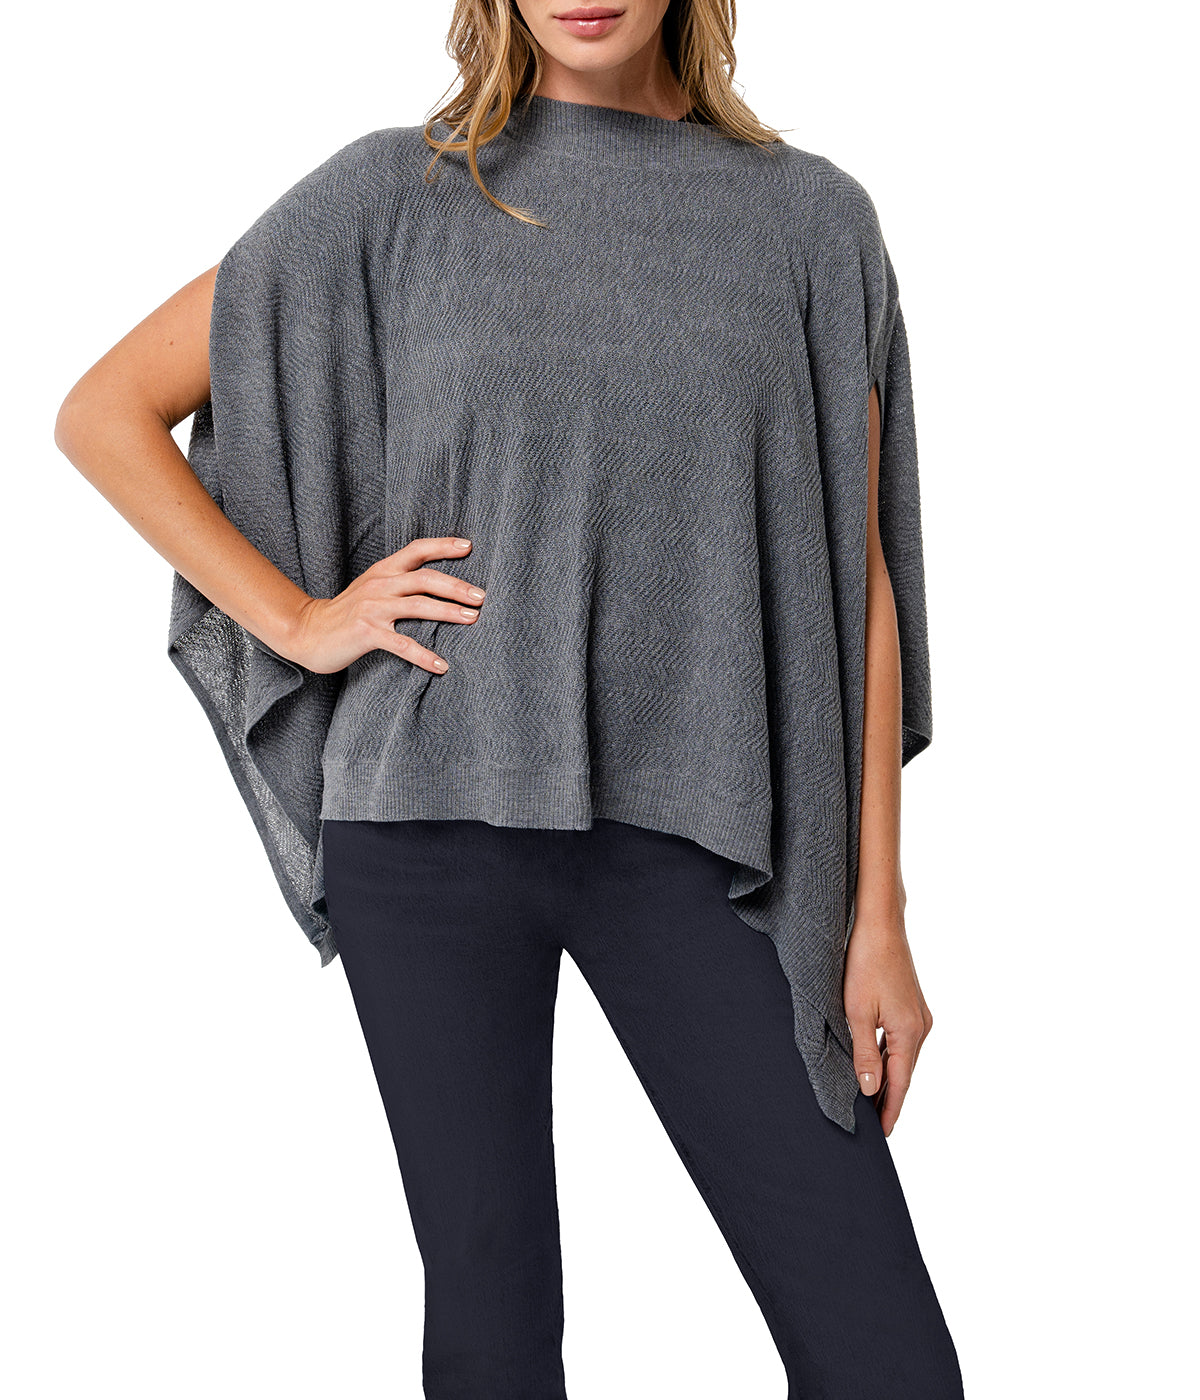 CADILLAC Fully Fashioned Cape Sweater